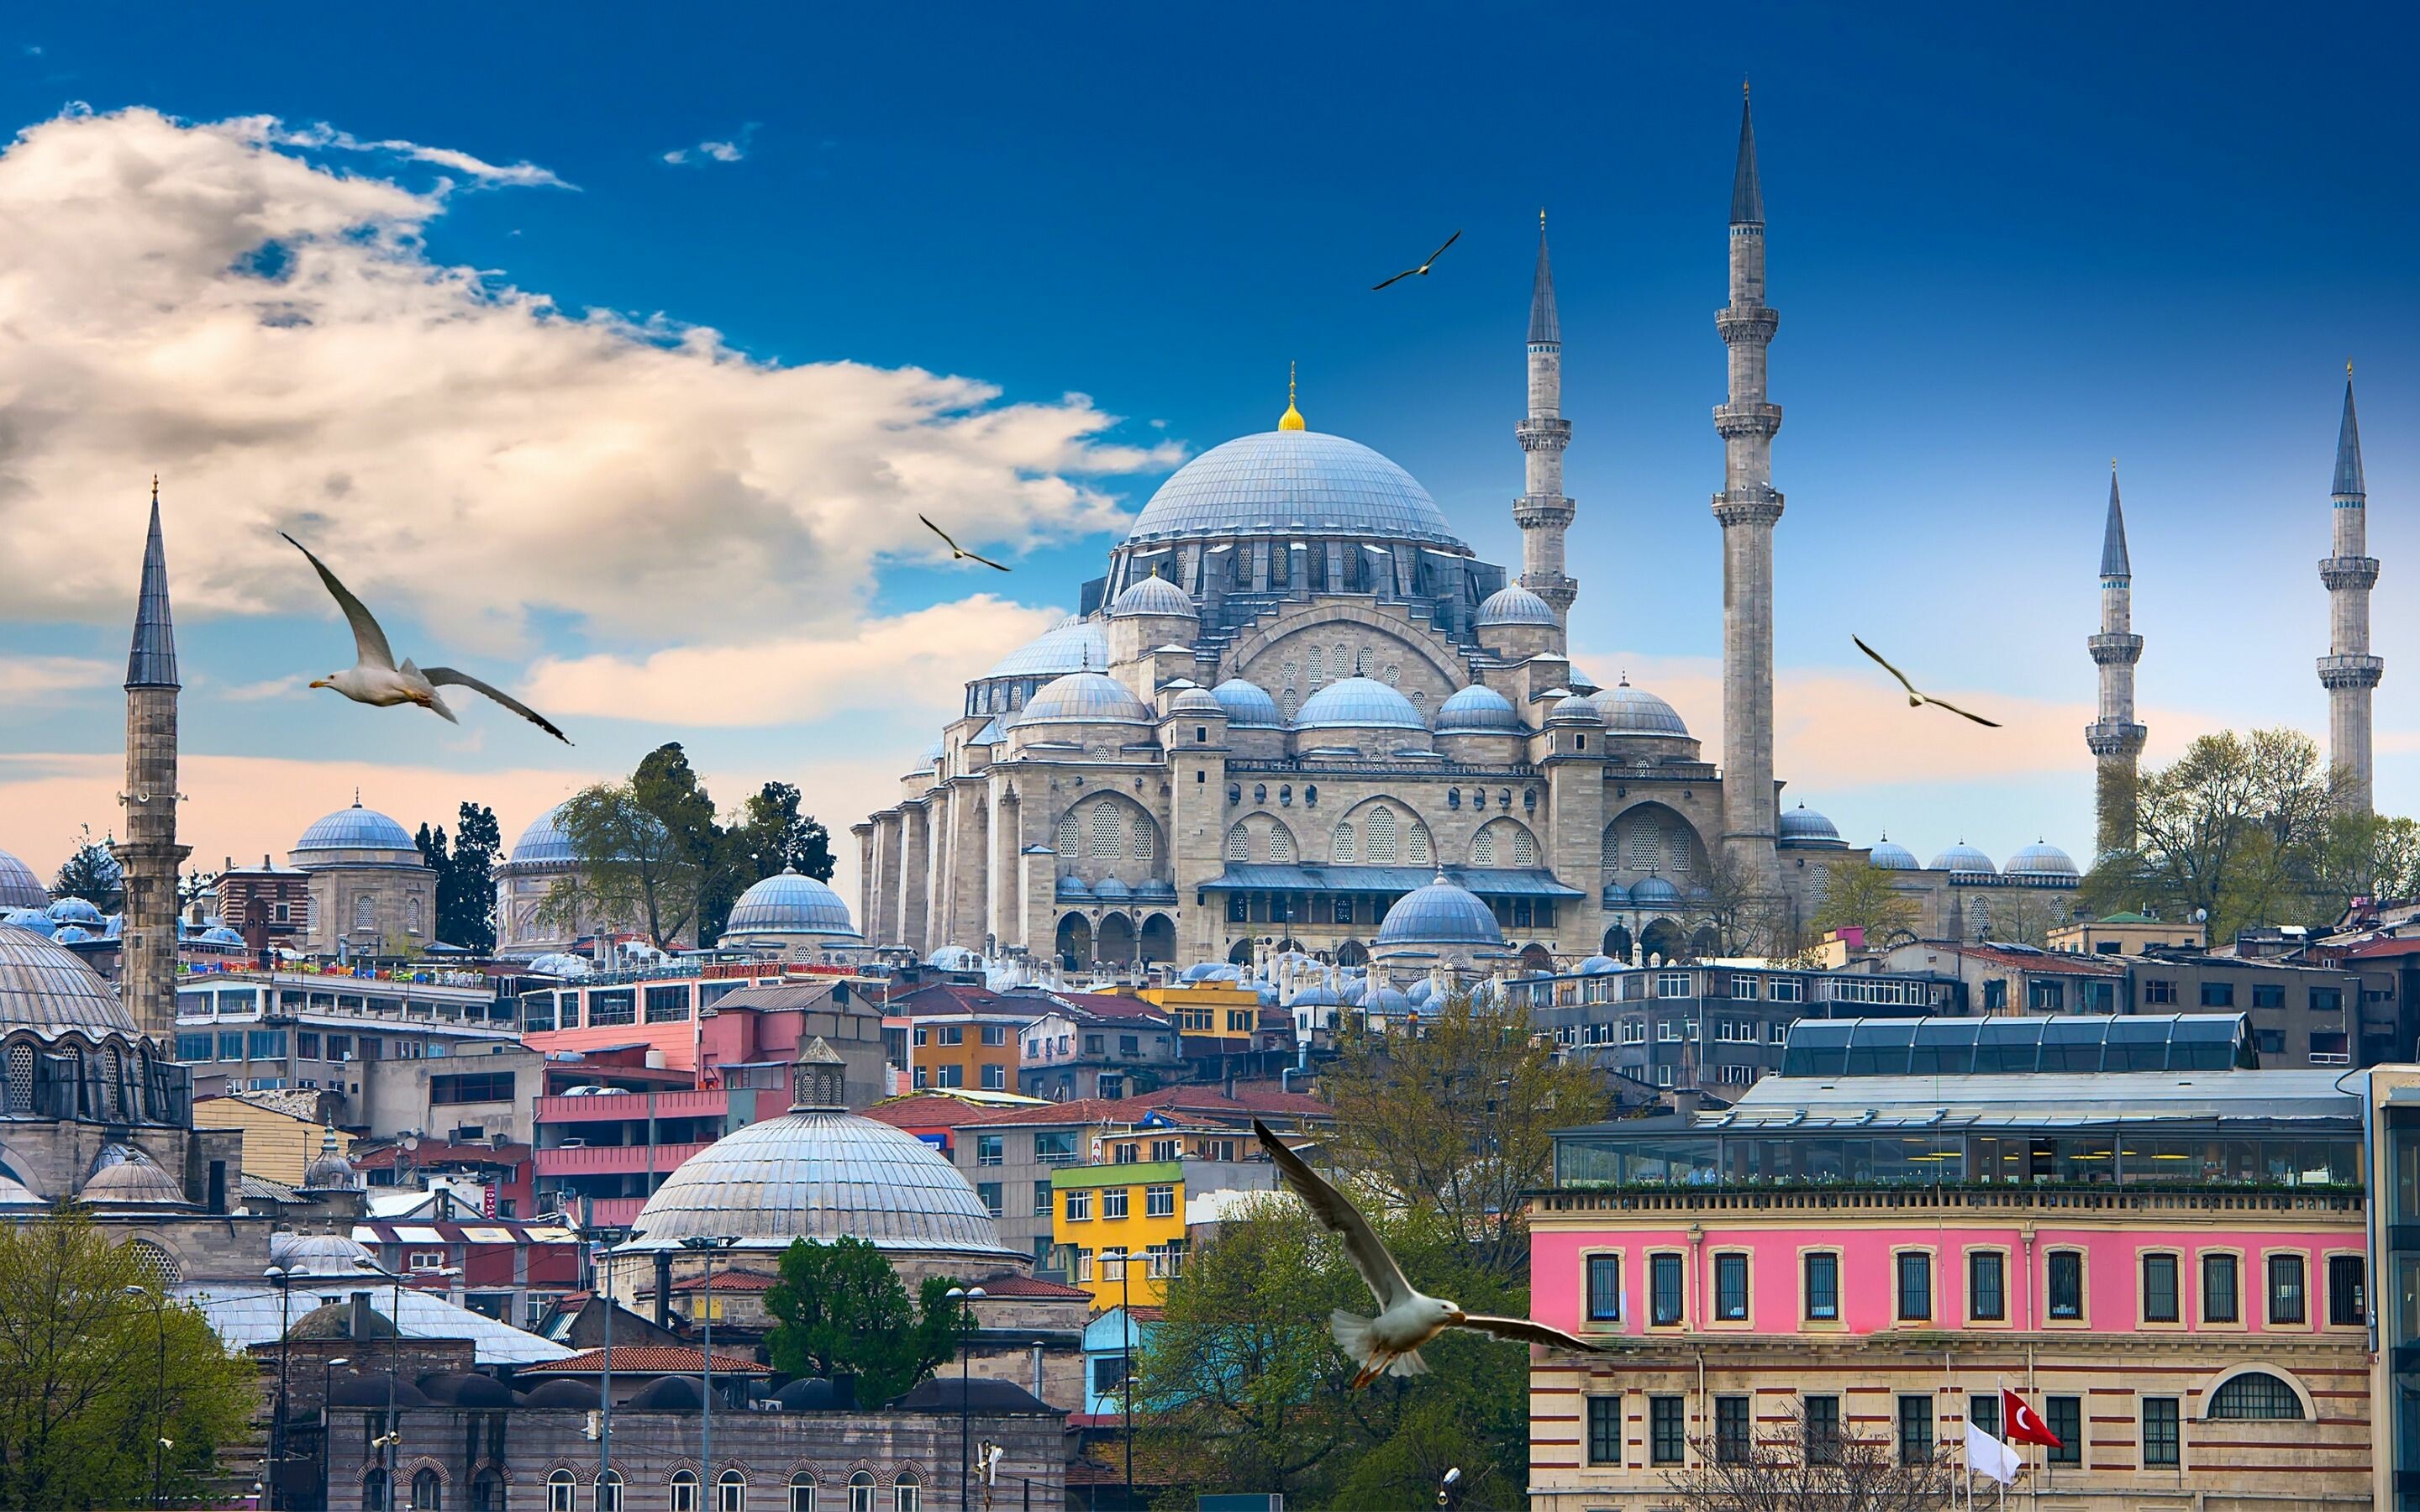 Turkey: Blue Mosque, an Ottoman-era historical imperial mosque located in Istanbul. 2880x1800 HD Wallpaper.